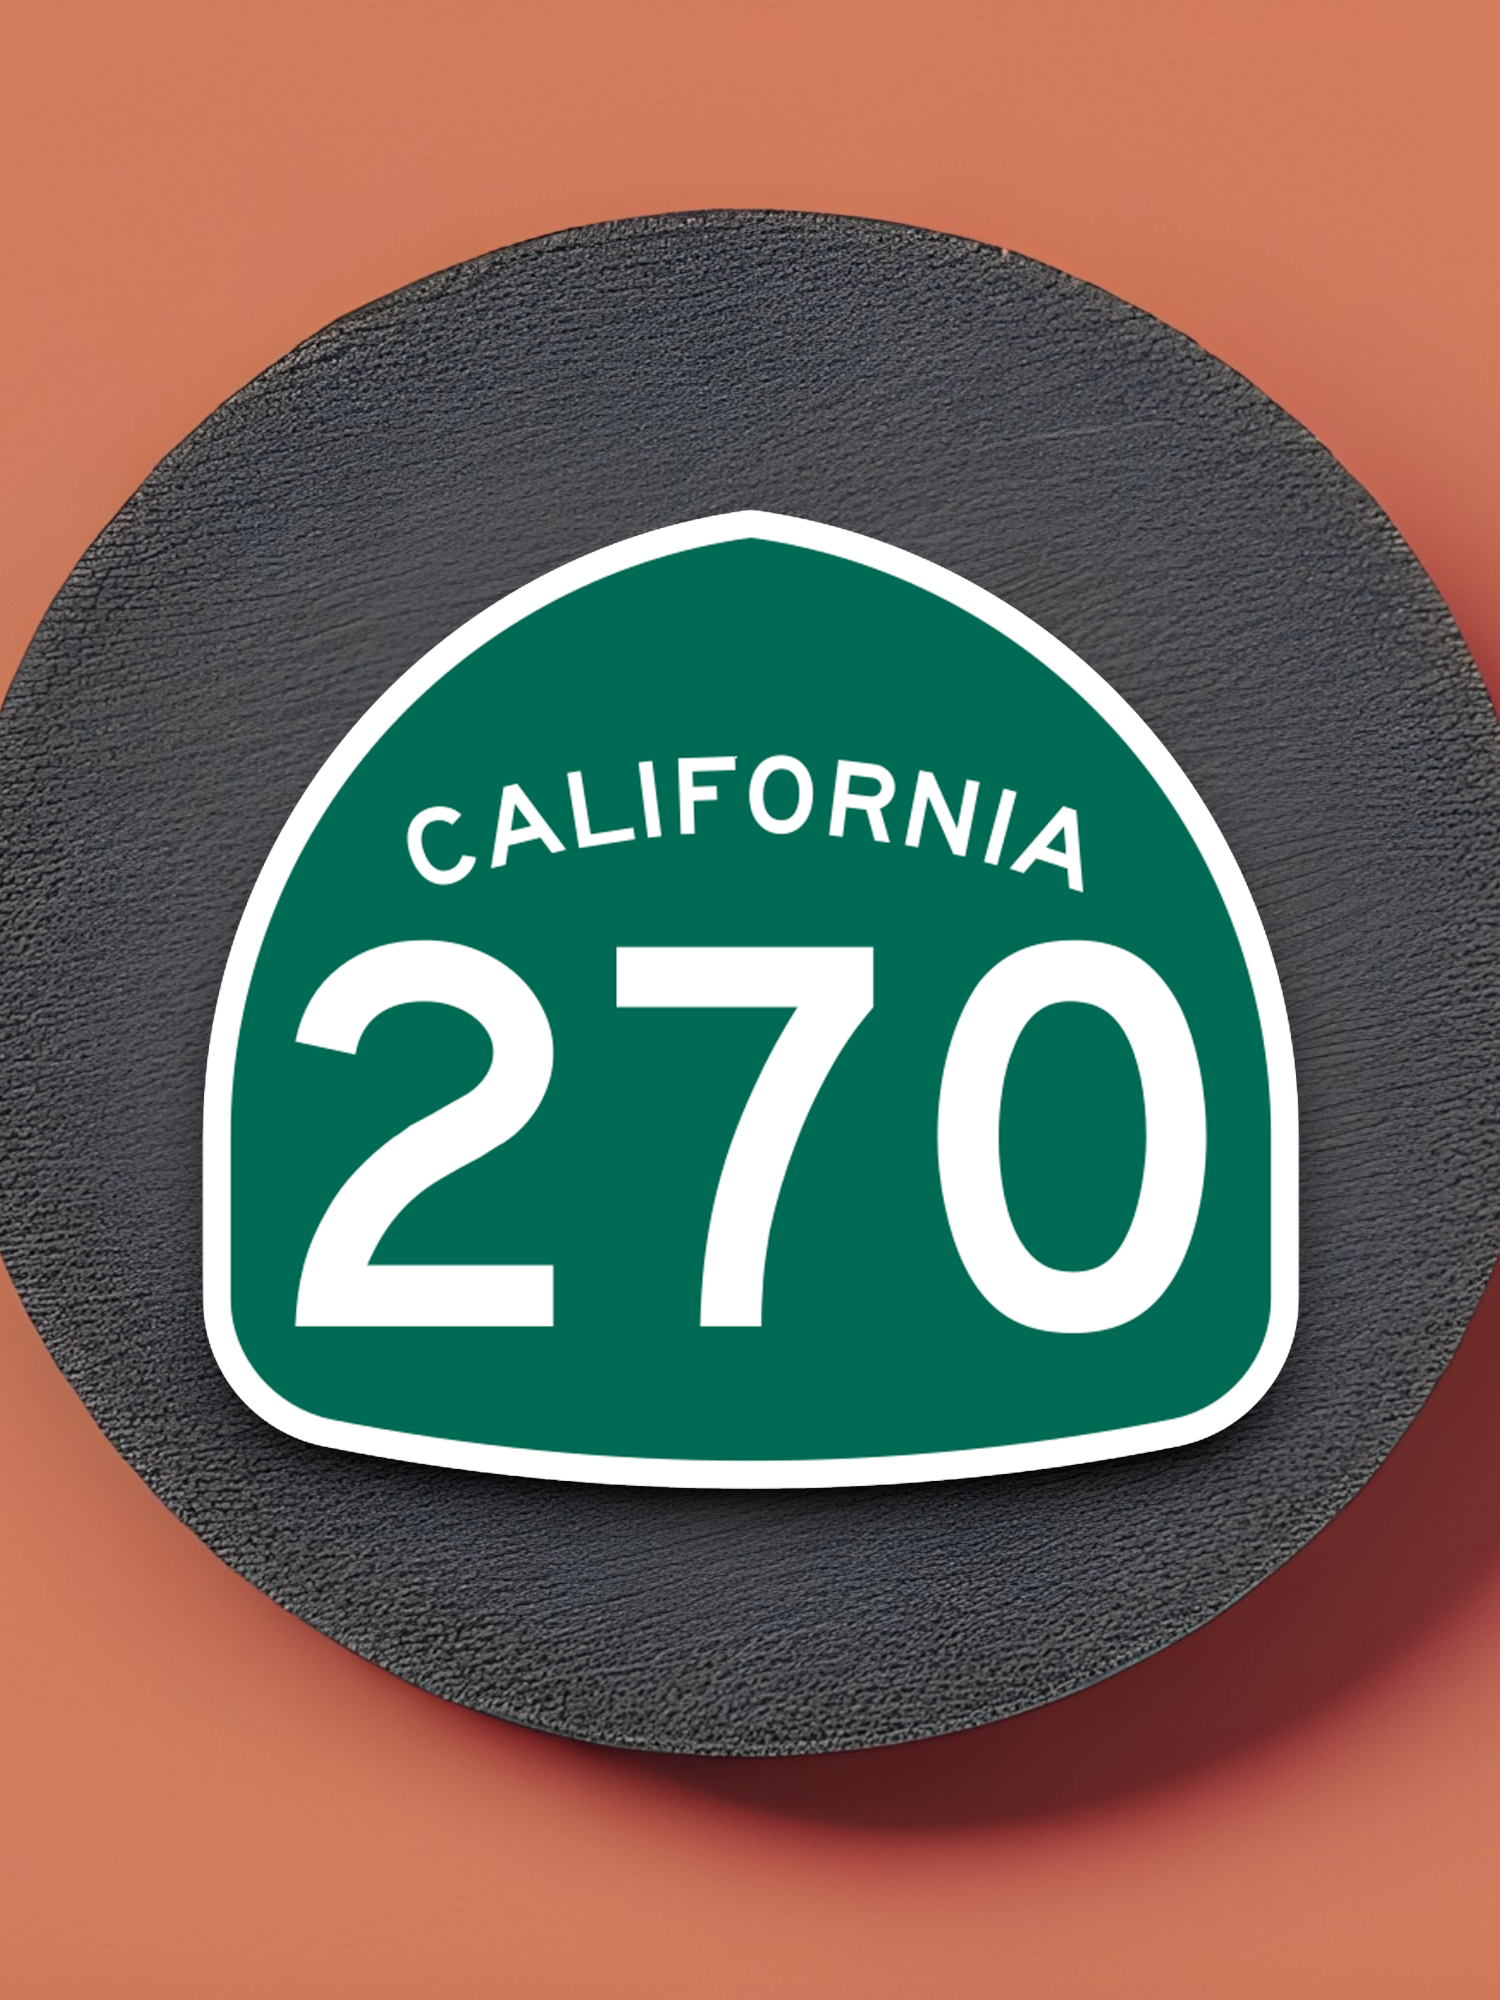 California State Route 270 Road Sign Sticker